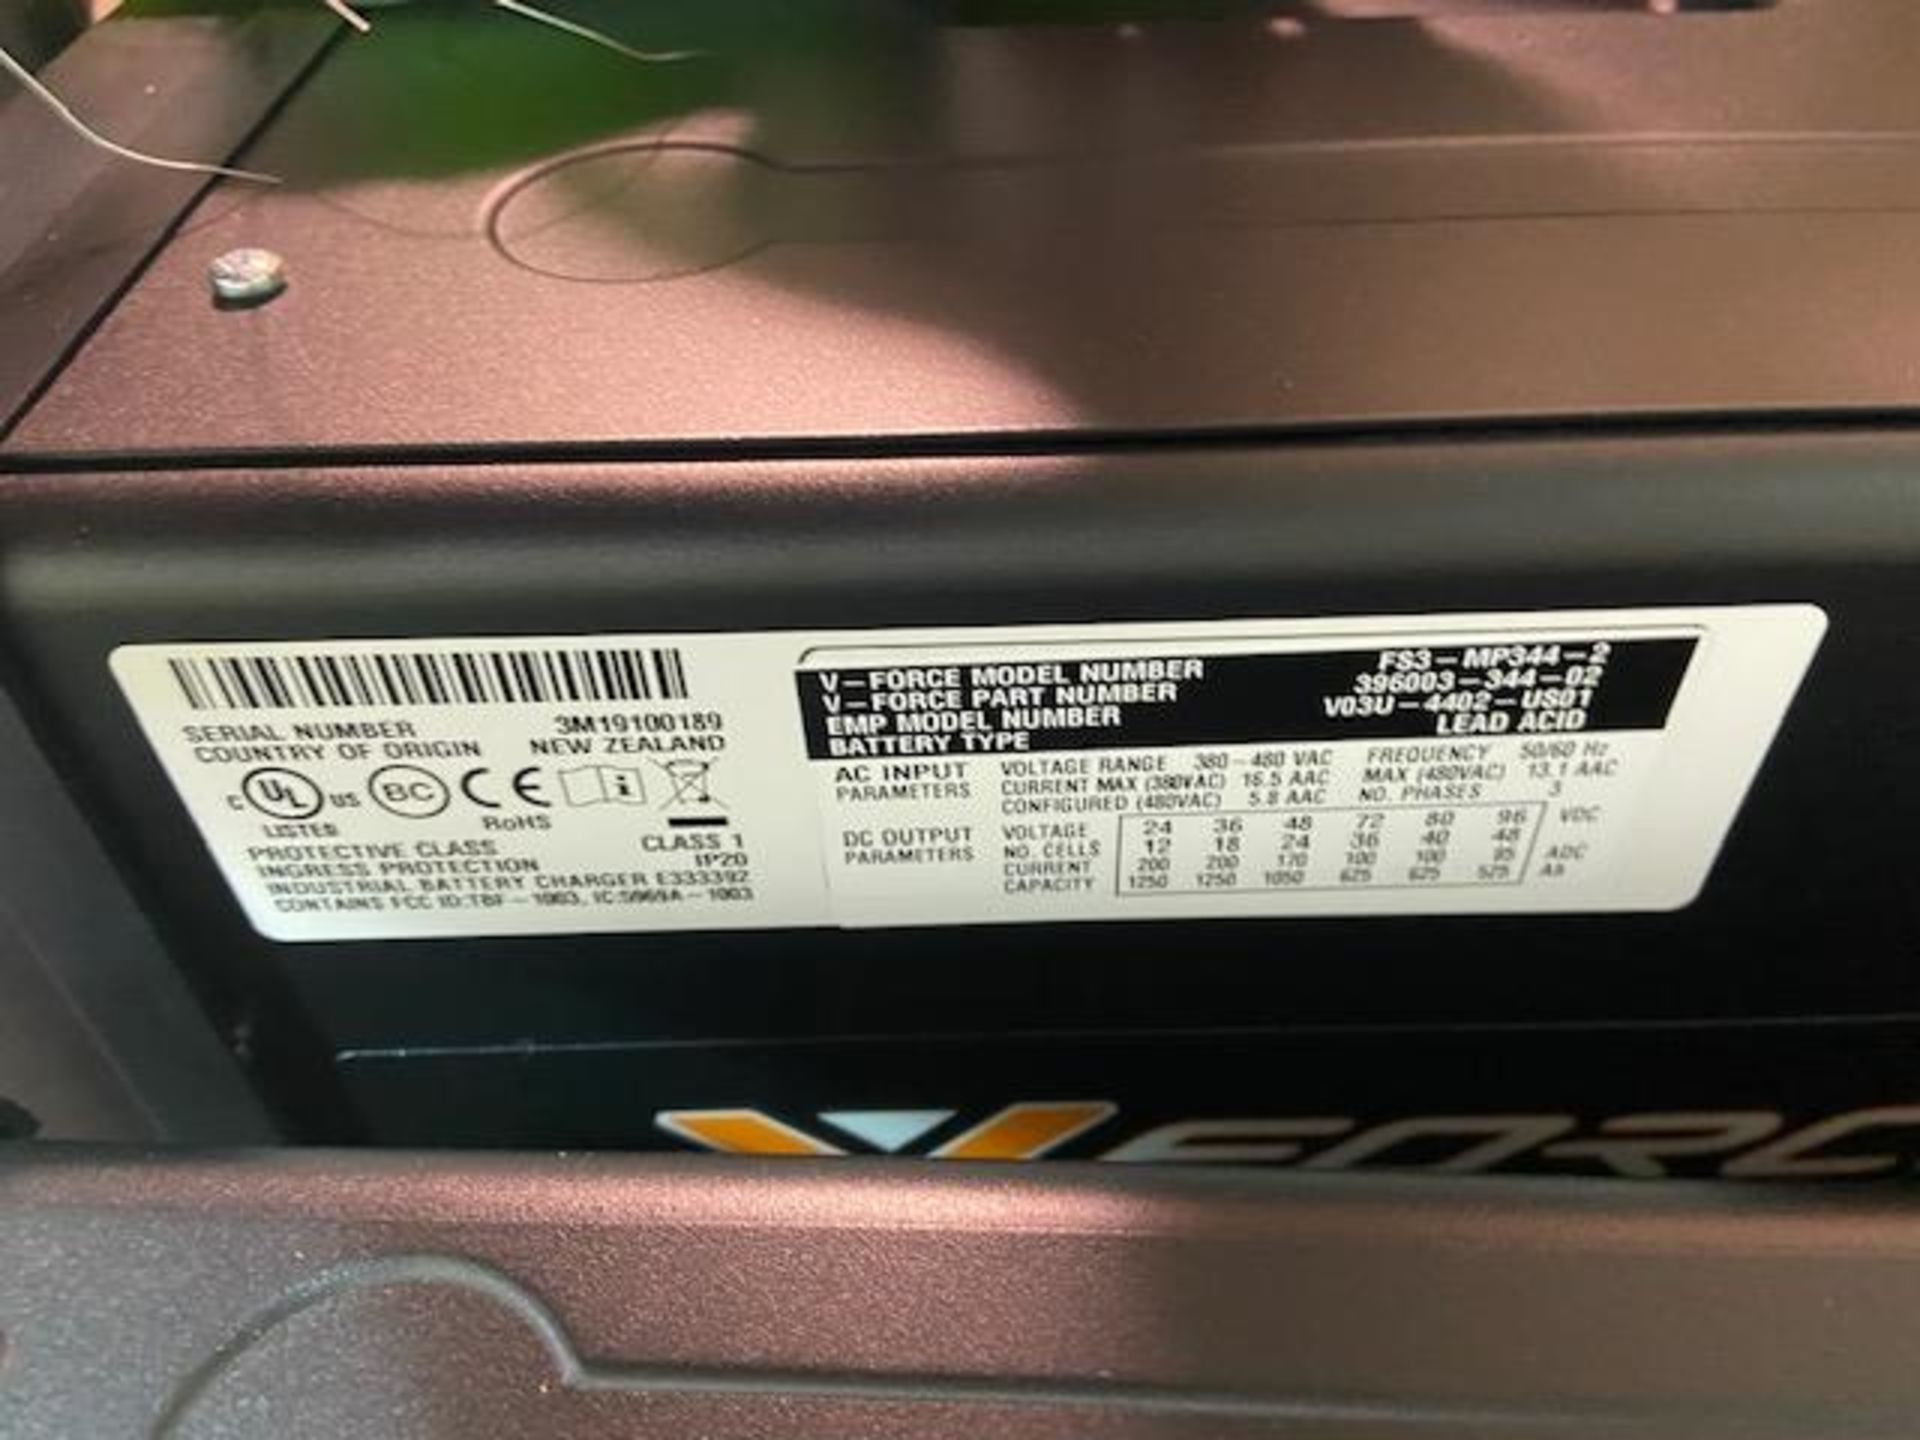 NEW VForce Forklift Battery Charger, M/N FS3-MP344-3, with Attachment (LOCATED IN LOS ANGELES, CA) - Image 2 of 3